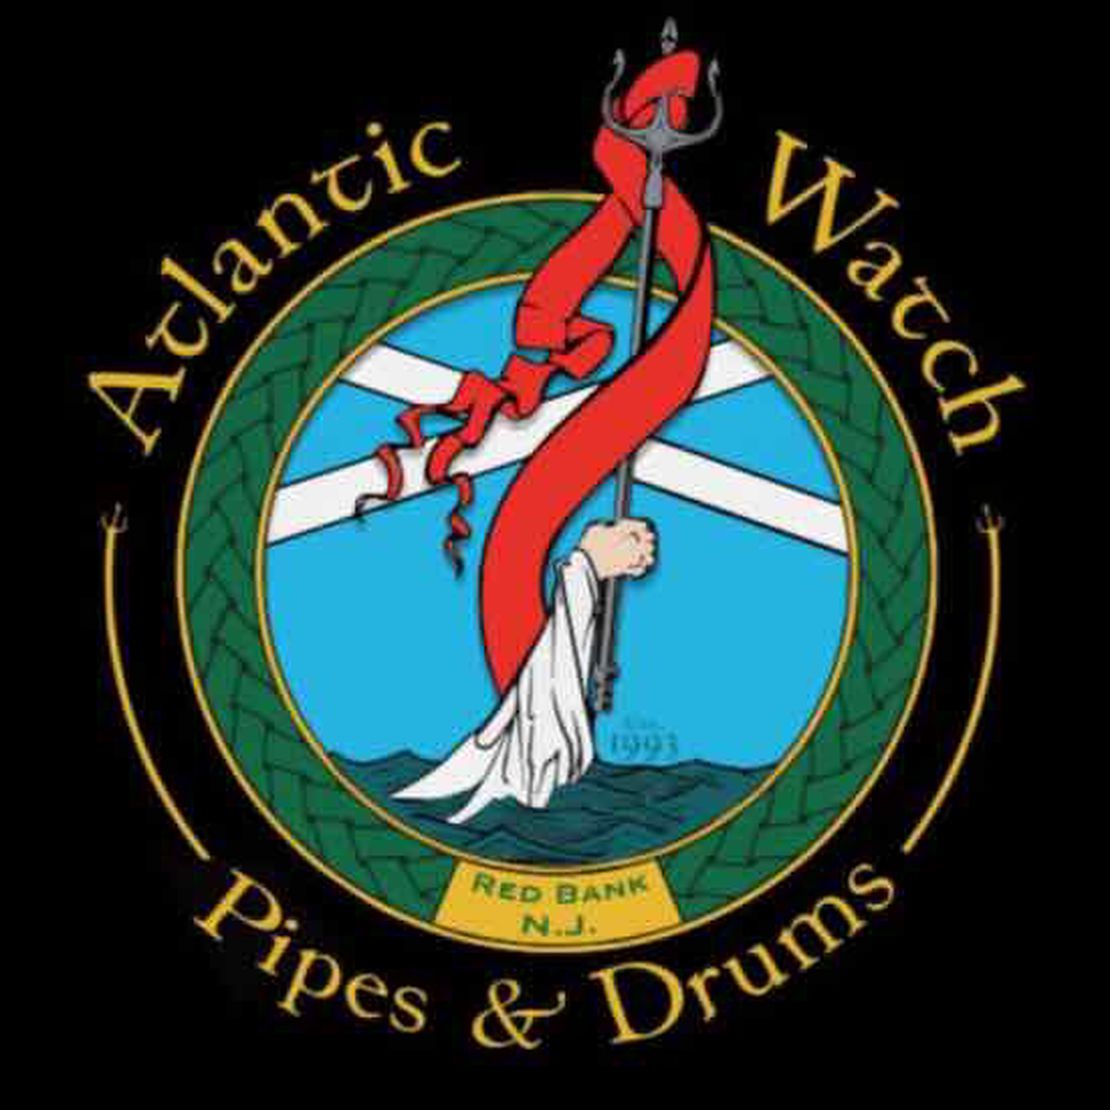 atlantic watch pipes and drums